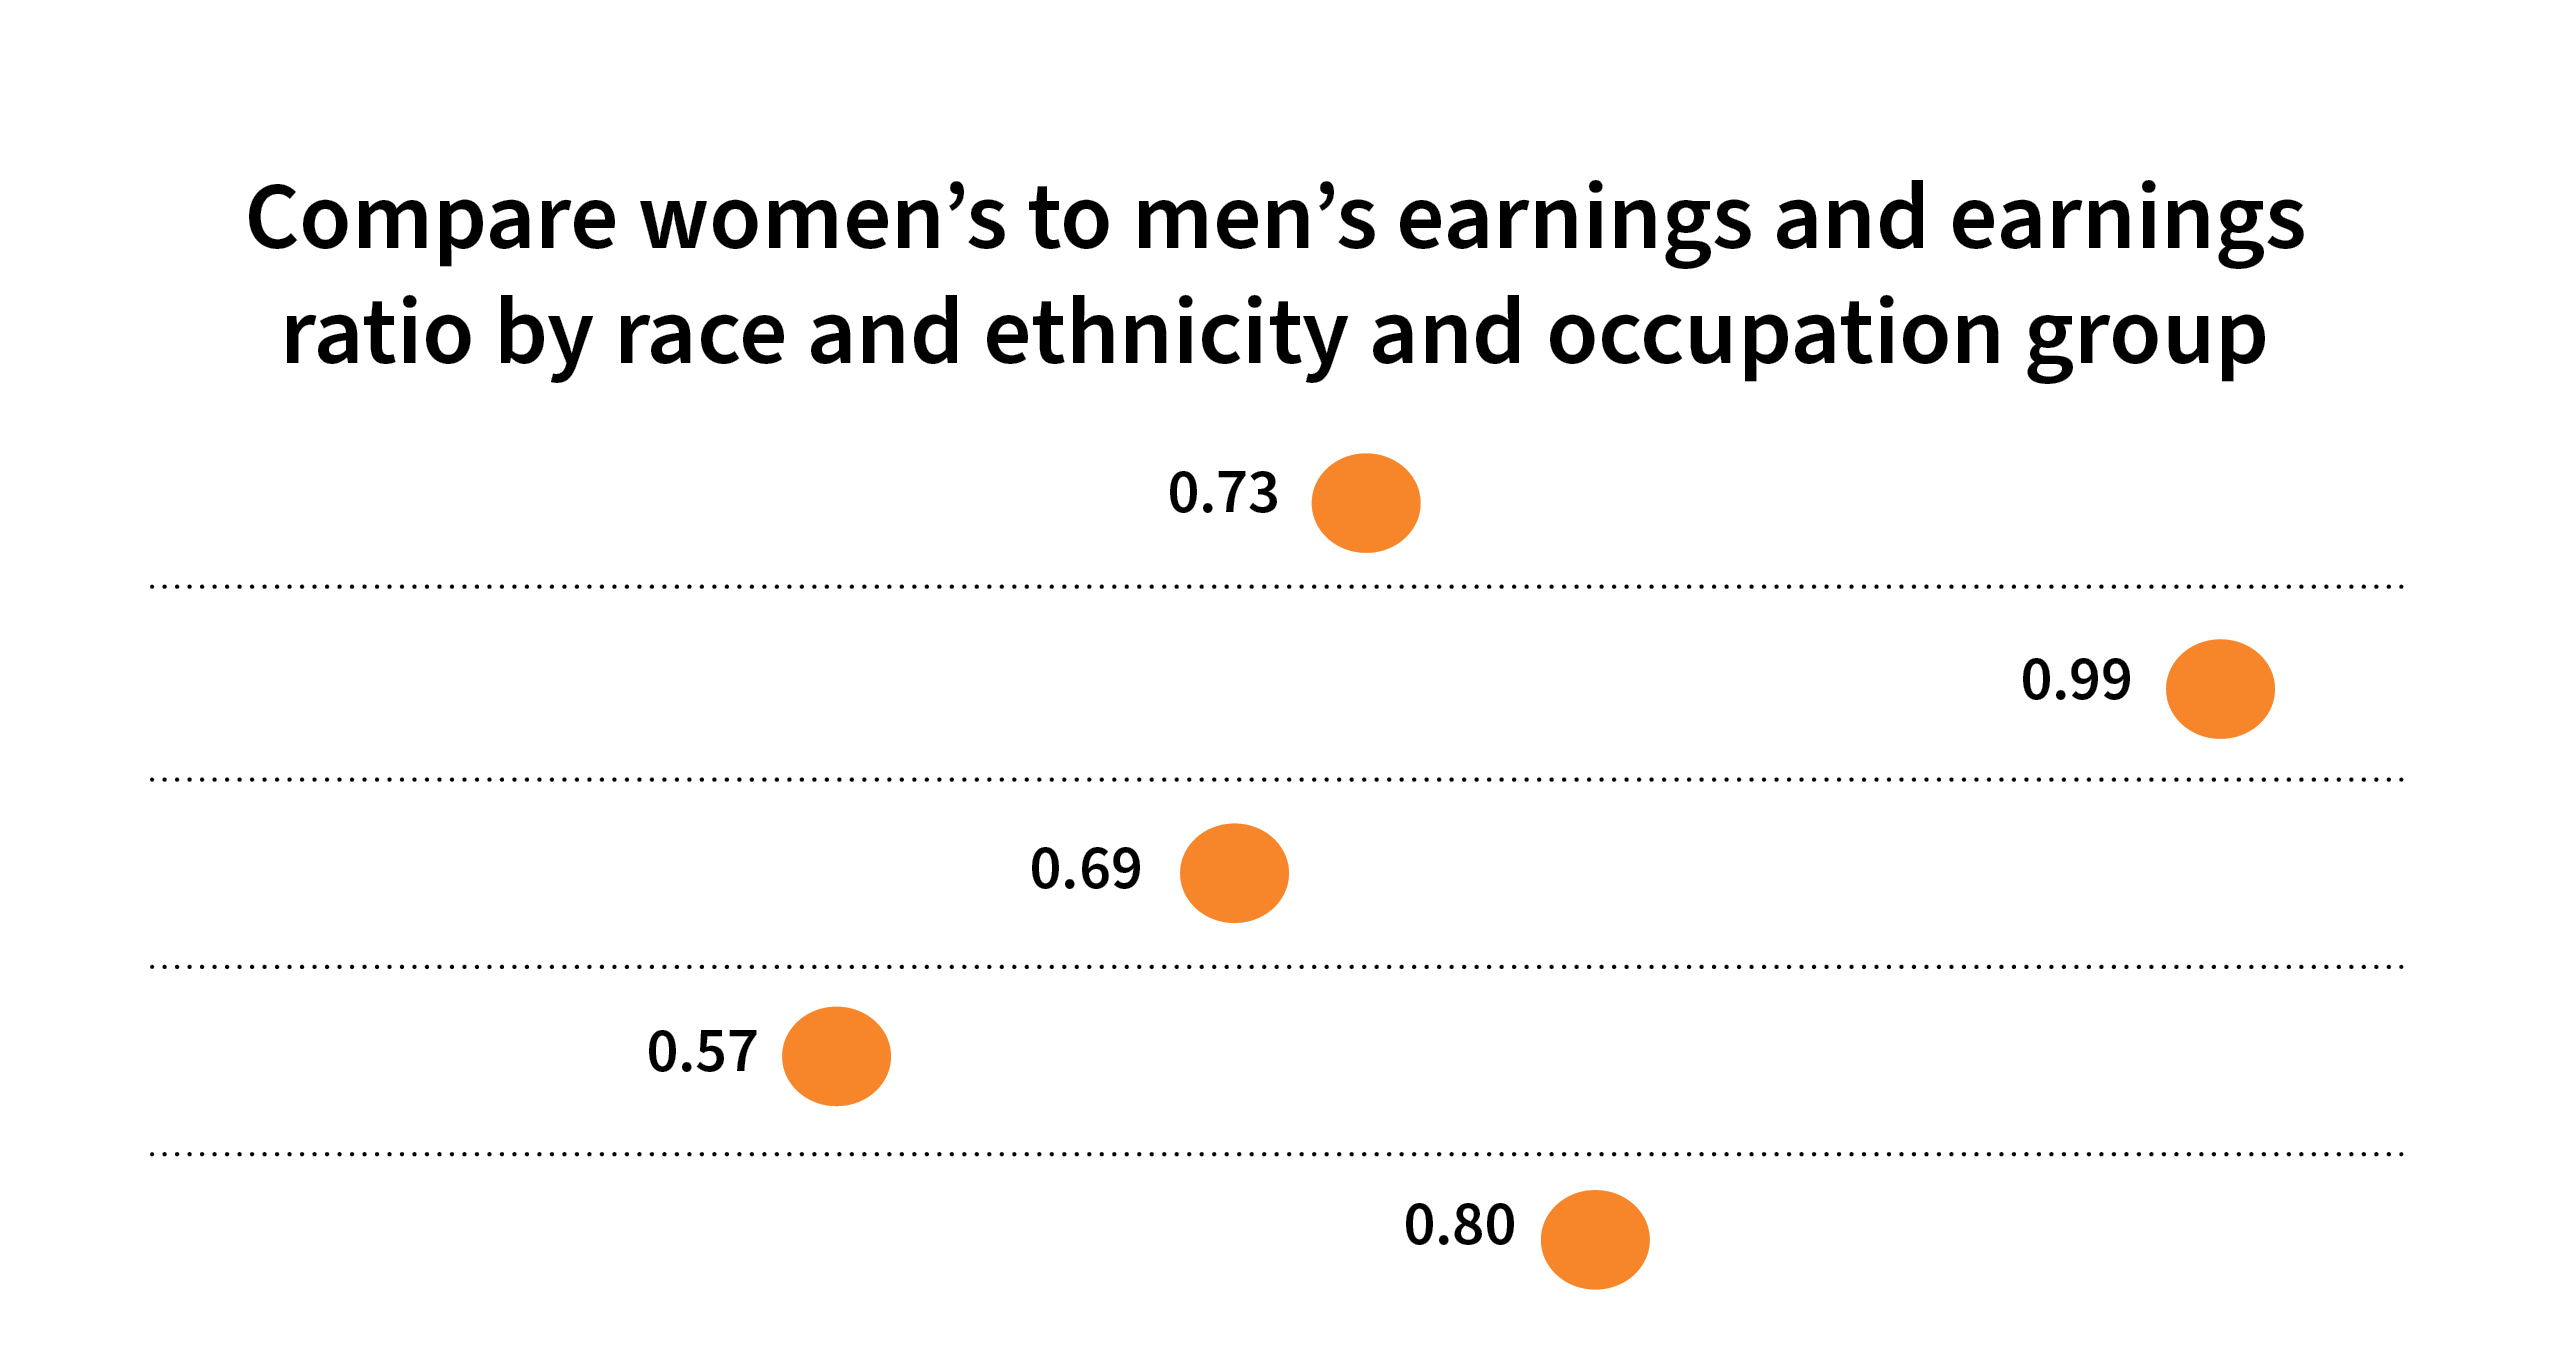 compare women's to men's earnings and earnings ratio by race and occupation group